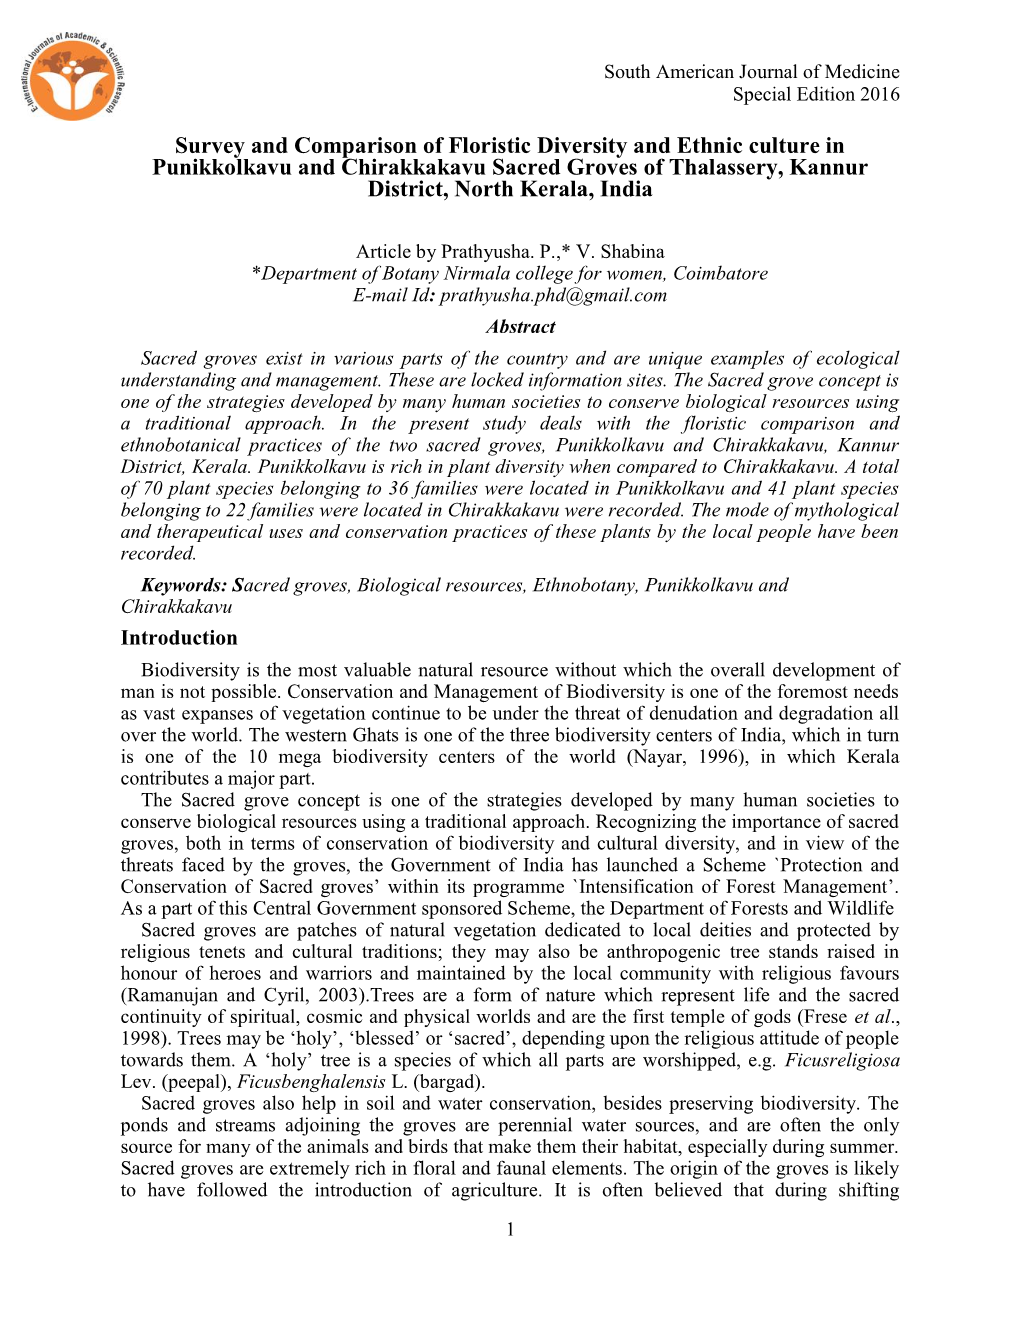 Survey and Comparison of Floristic Diversity and Ethnic Culture in Punikkolkavu and Chirakkakavu Sacred Groves of Thalassery, Kannur District, North Kerala, India